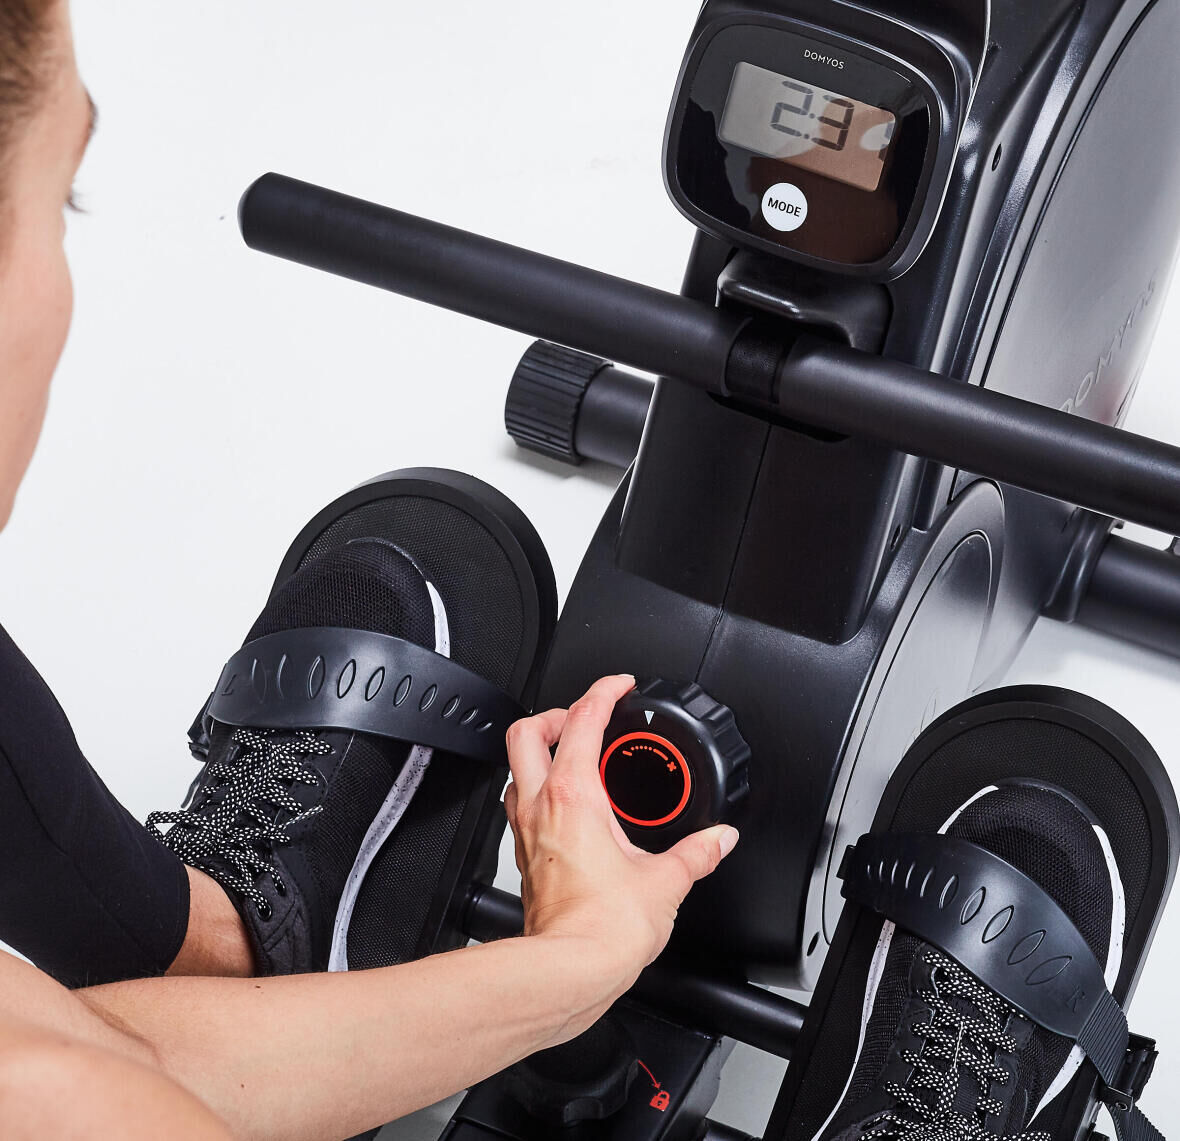 How to Use My Rowing Machine Most Efficiently?